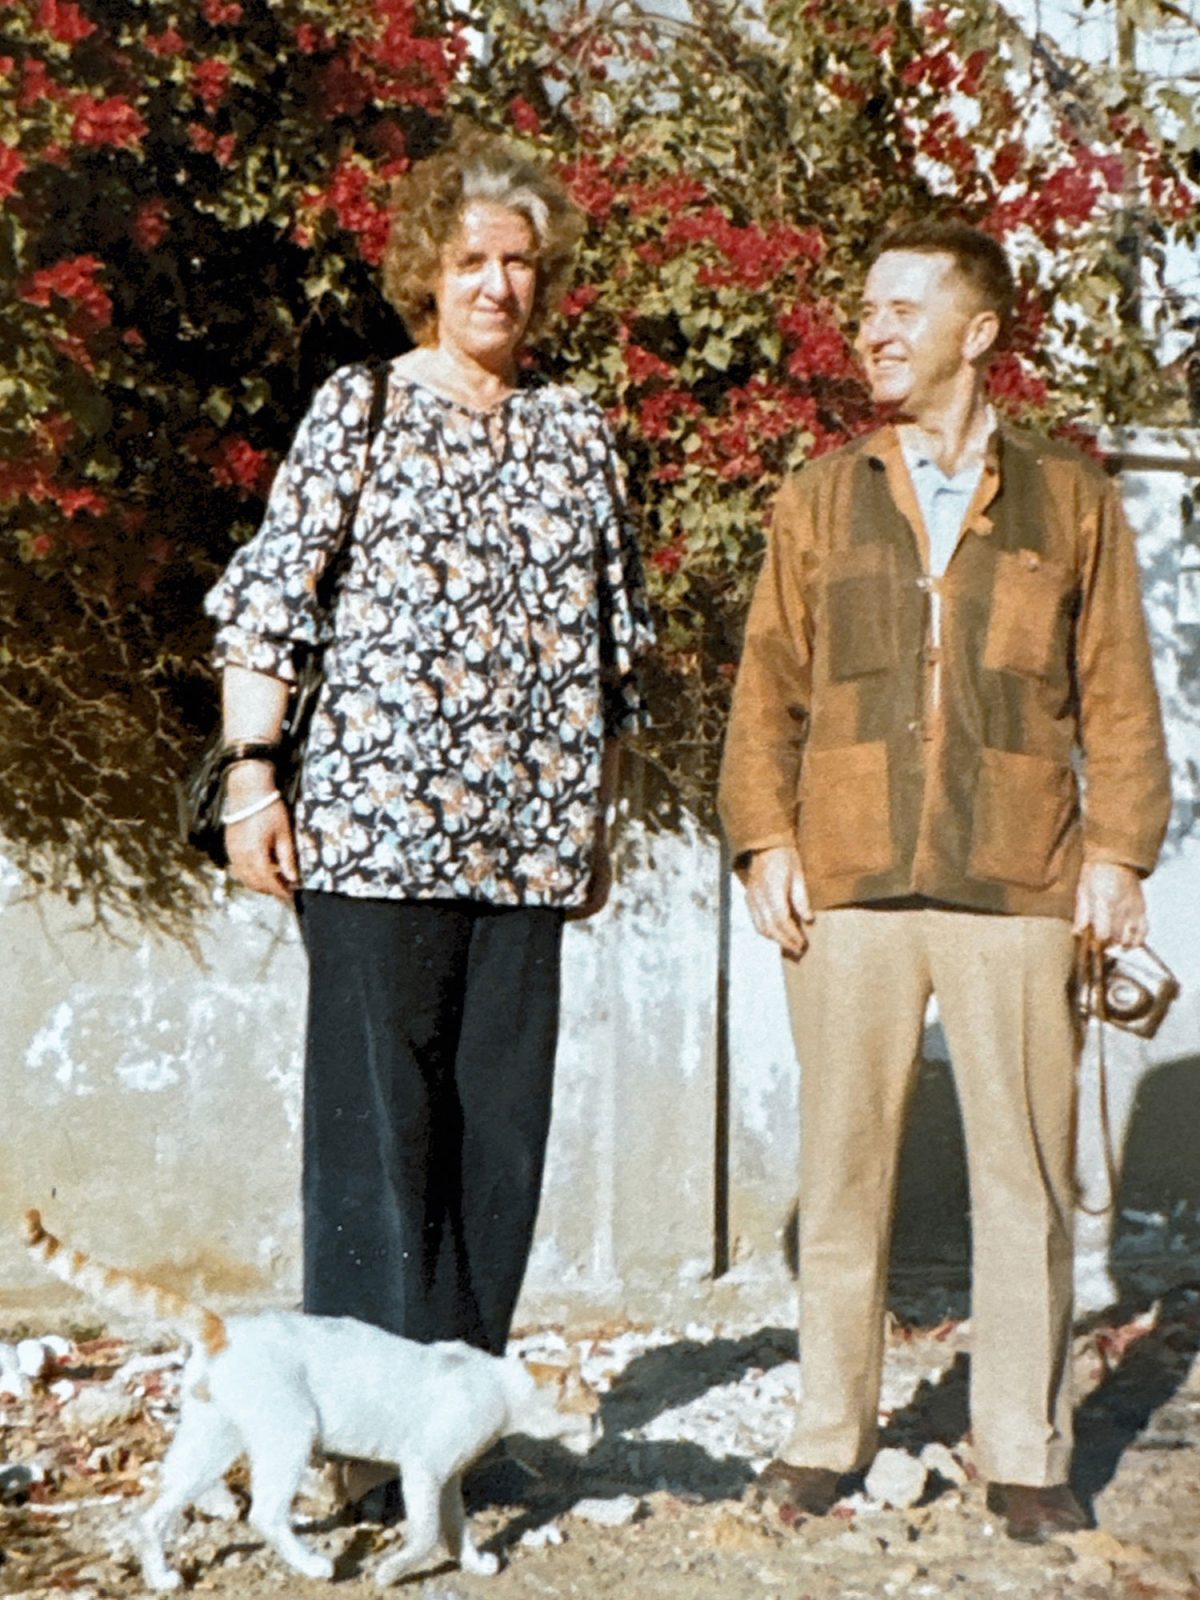 Inez Svensson in a patterned blouse with a happy man in a brown jacket; a white cat walks by their feet.